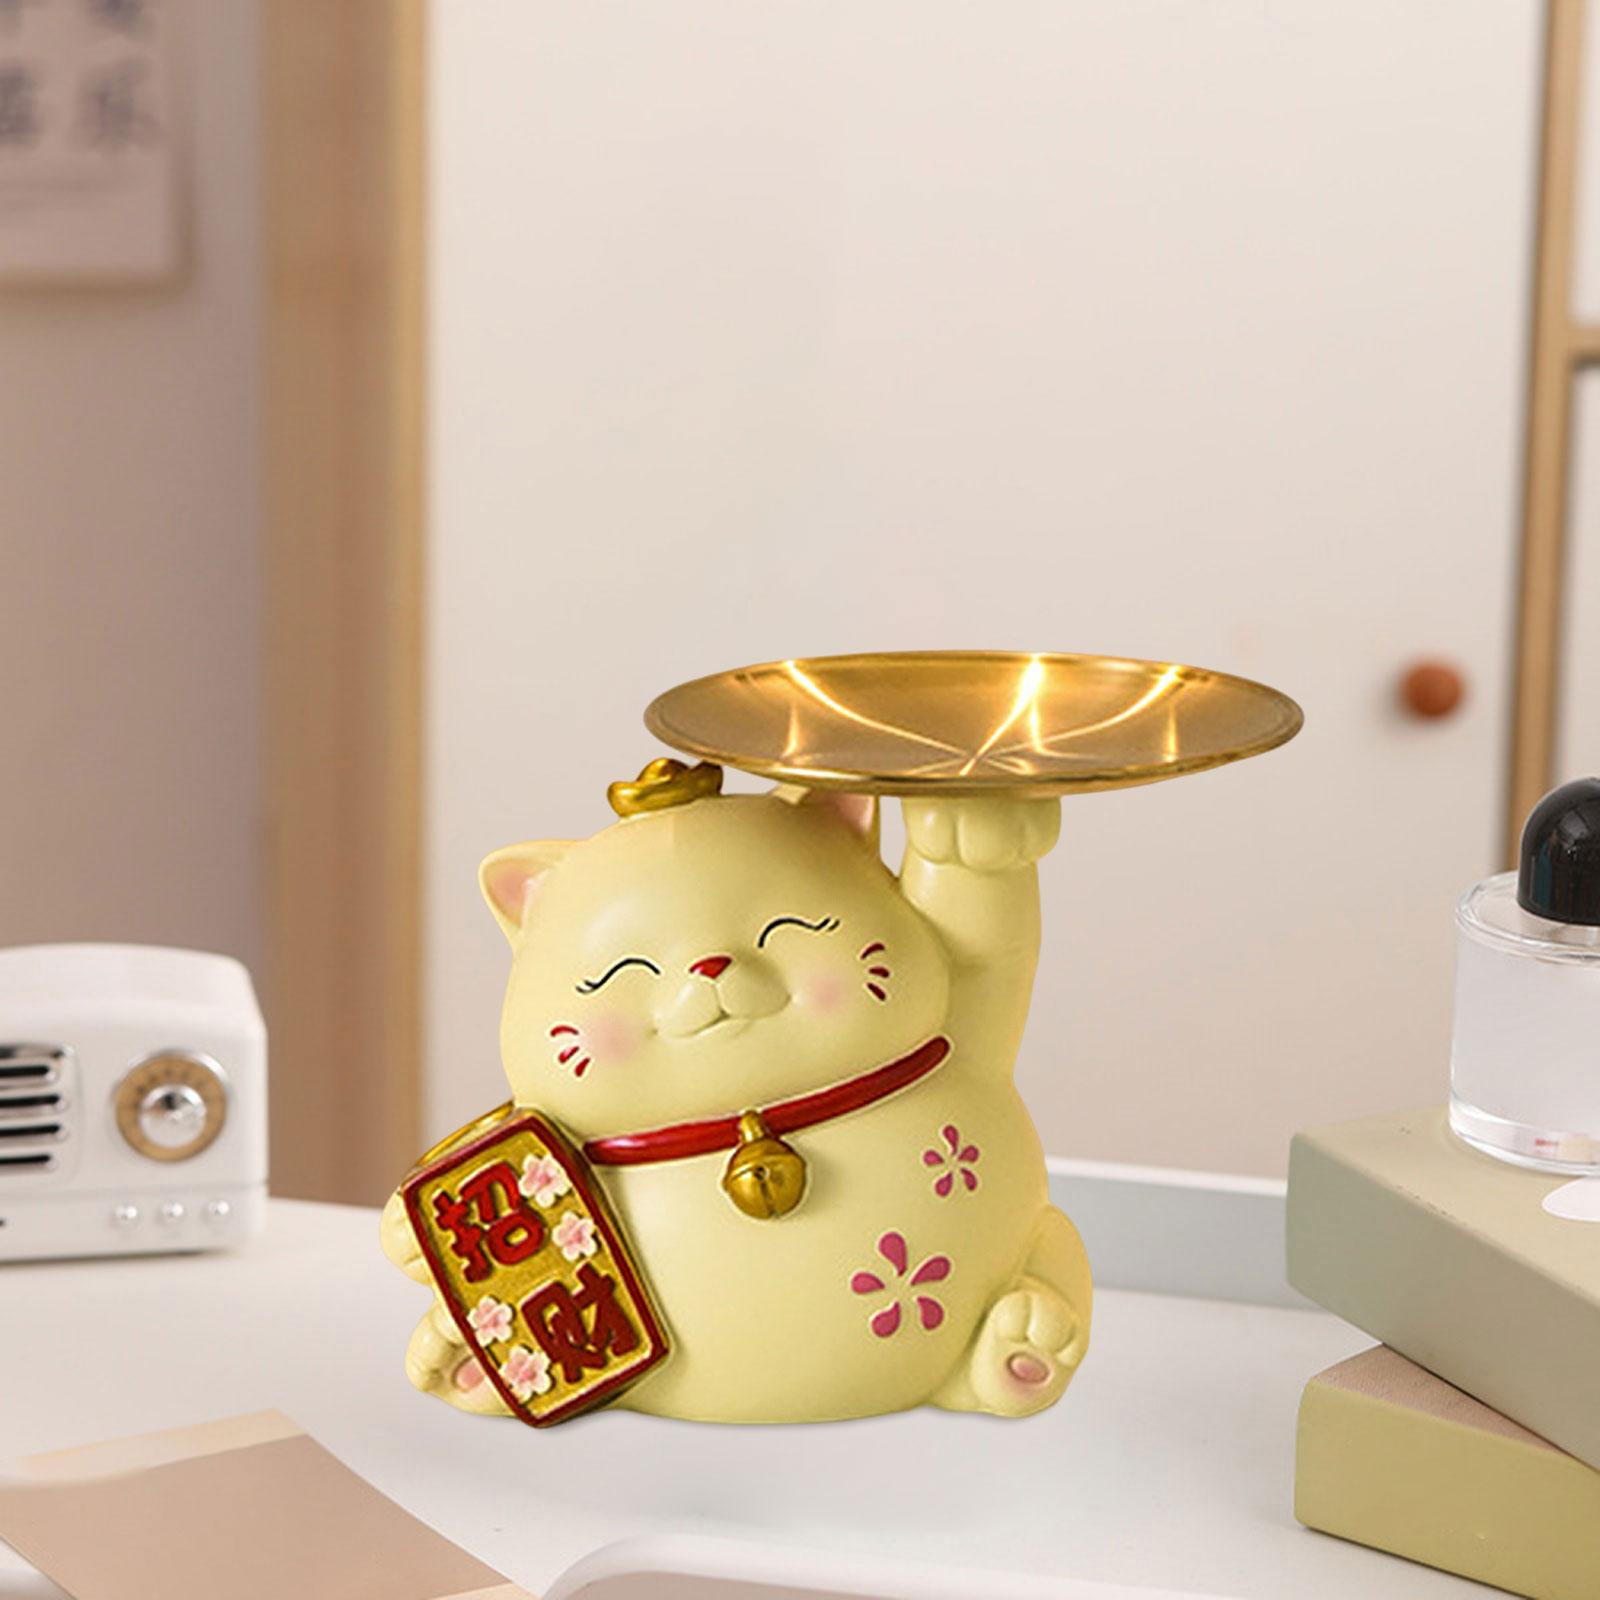 Lucky Cats Statue Home Decoration Keys Holder Sculpture Jewelry Trinket Tray Yellow